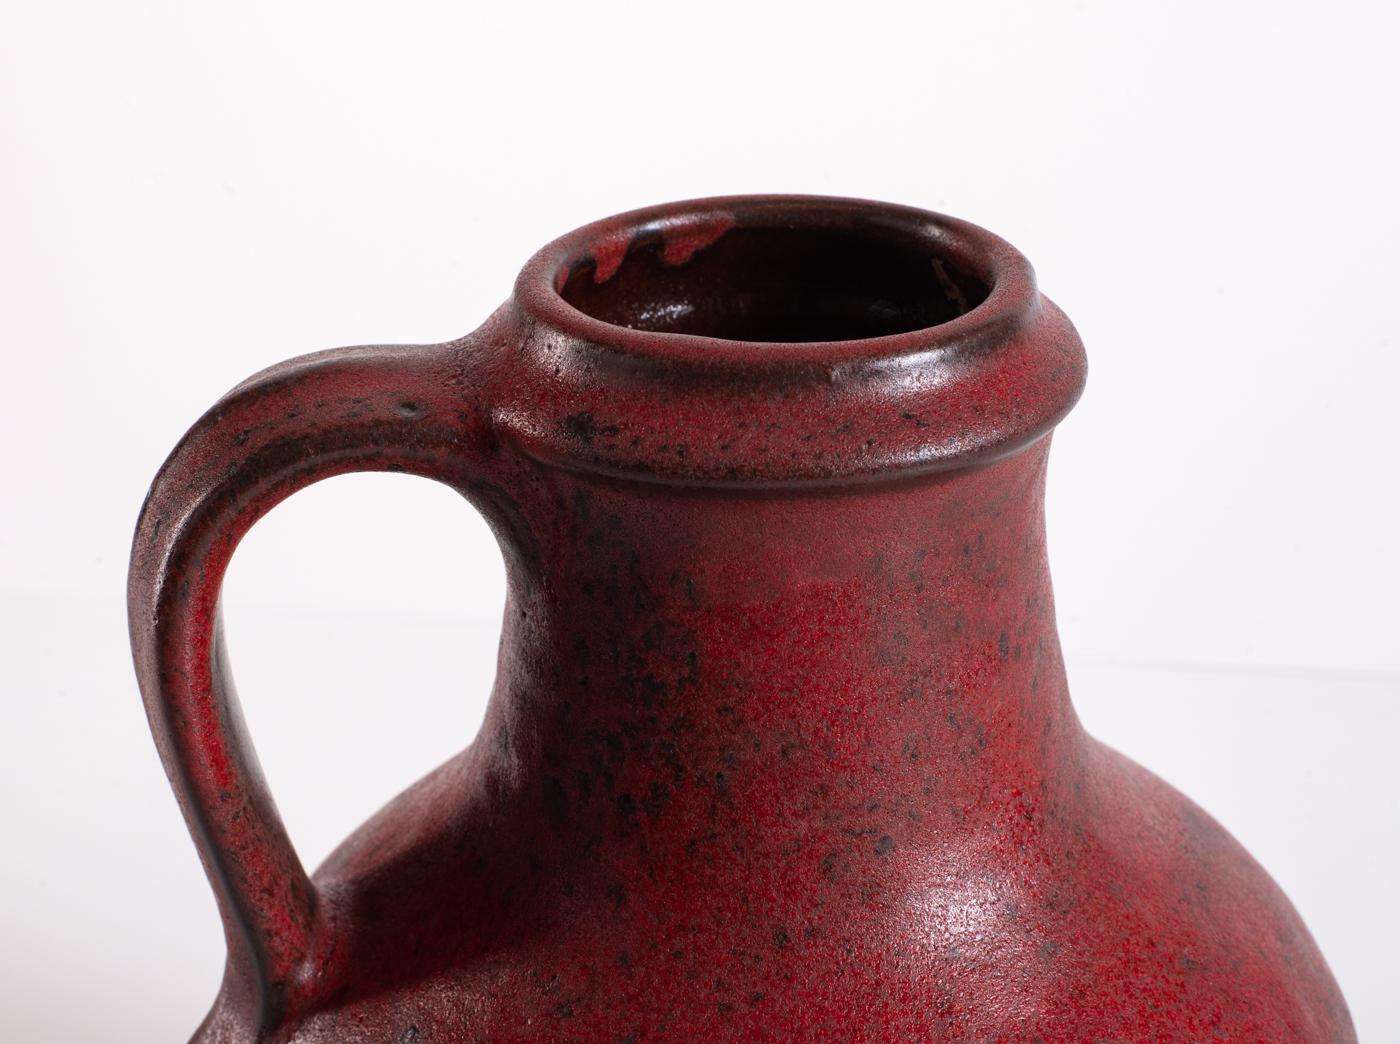 Rustic Pitcher Vase by Carstens Luxus, Fat Lava, Mid-Century Modern c. 1967 For Sale 1